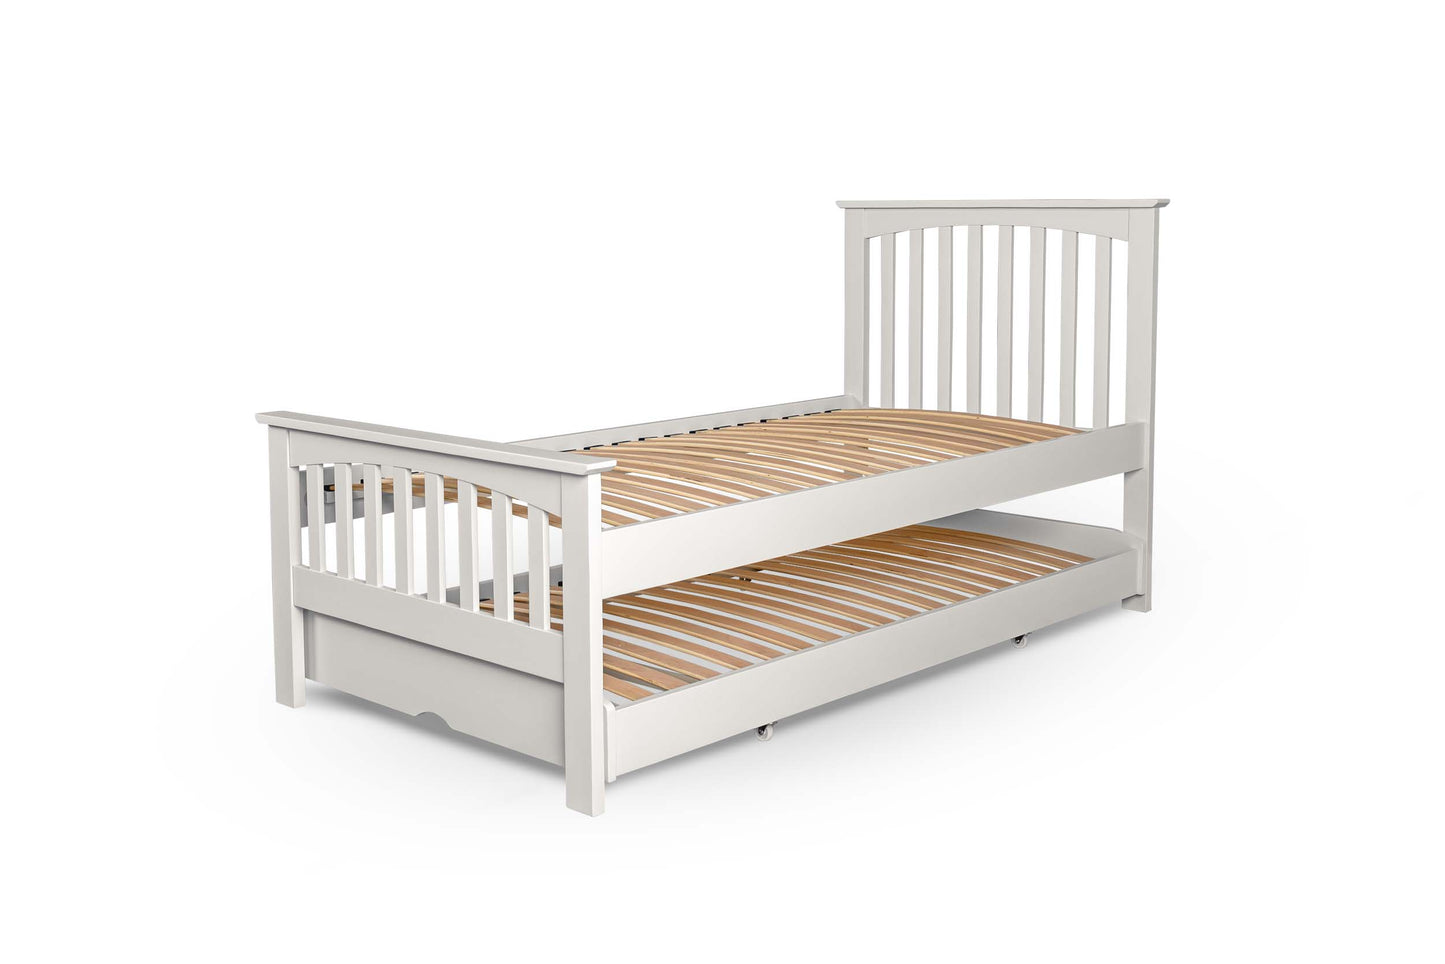 Hythe Guest Bed - 3ft Single - Soft White